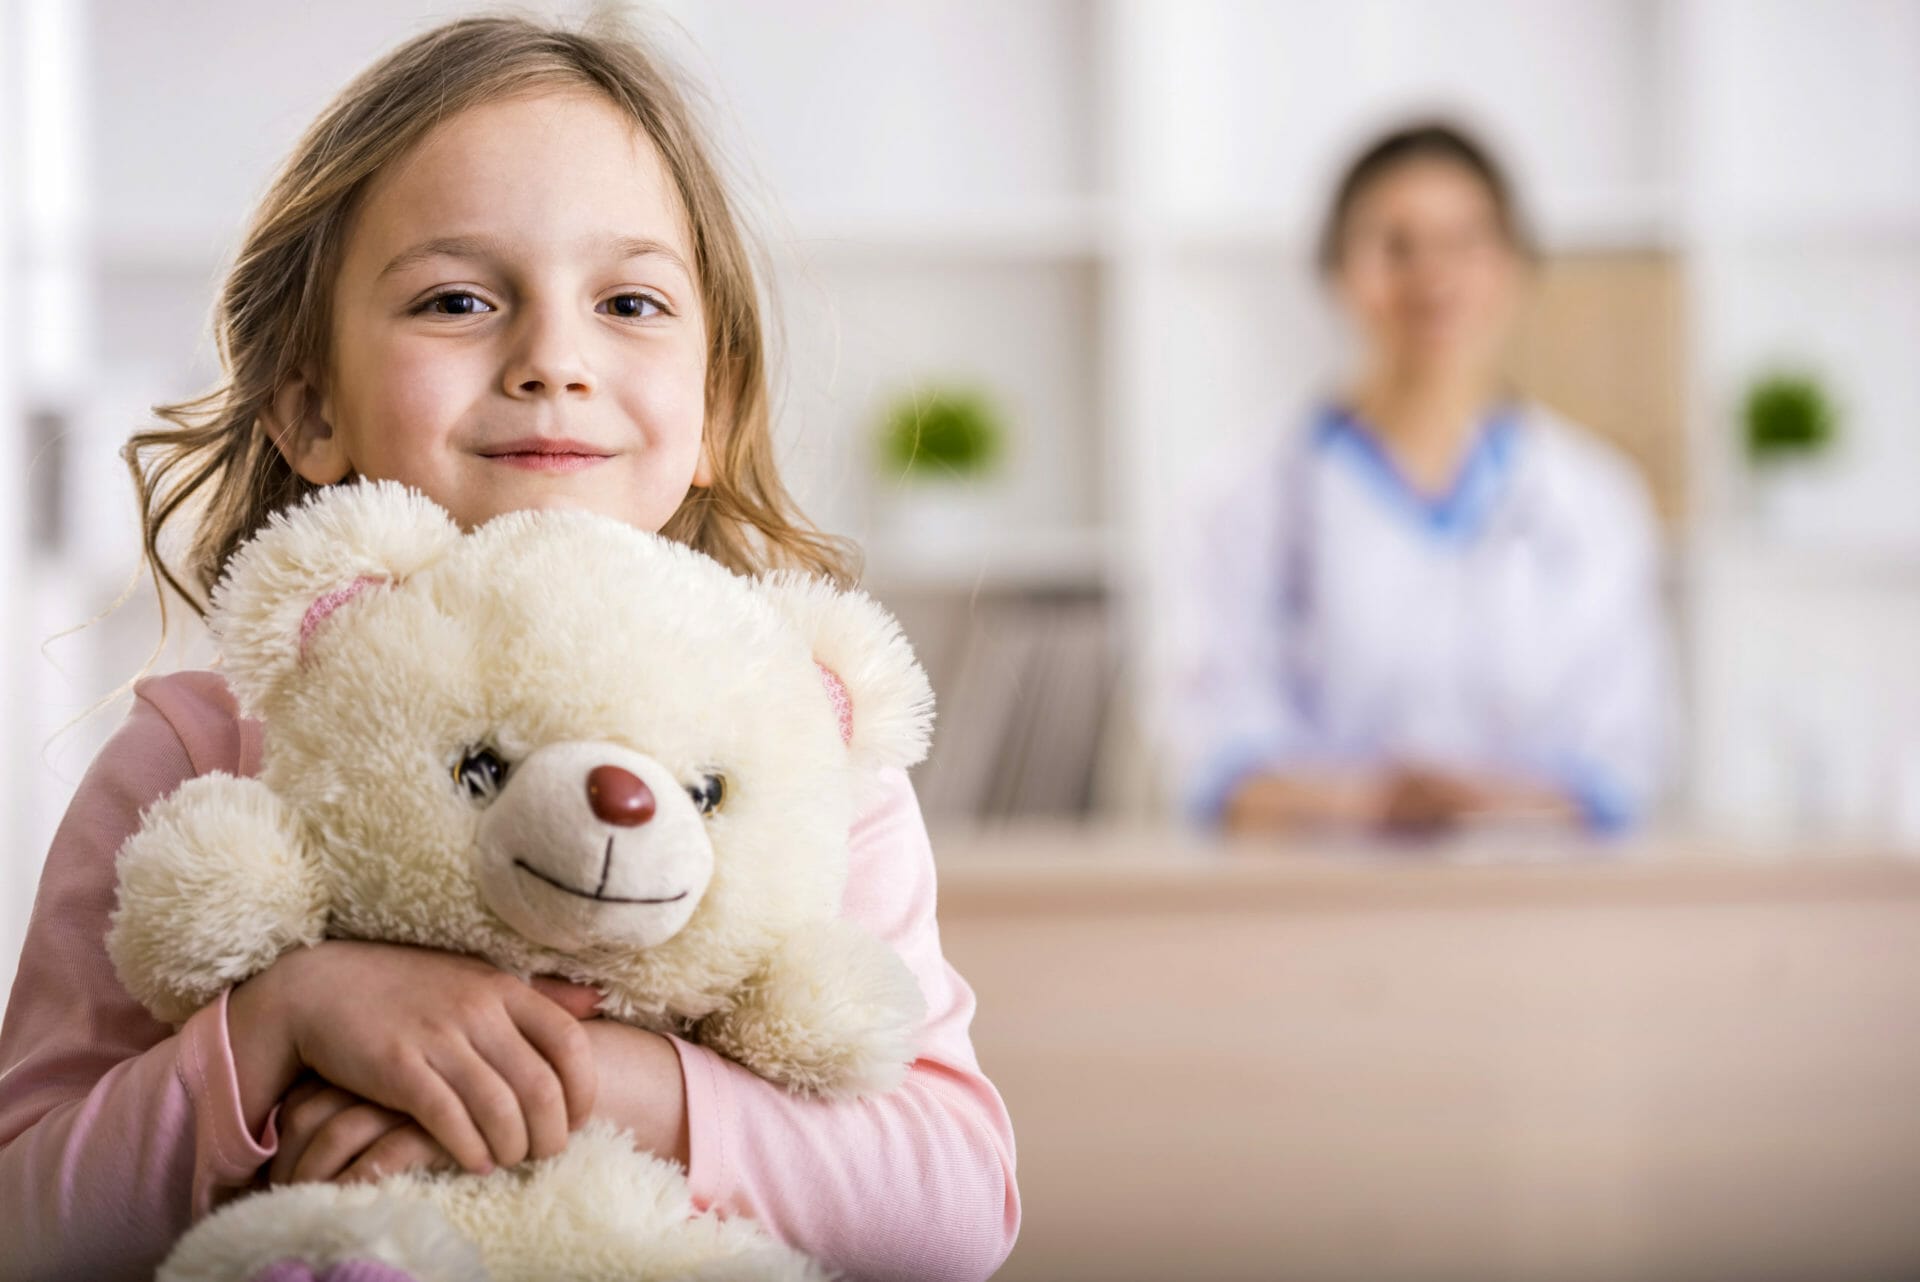 Little girl with teddy bear is looking at the camera. Female doctor on background.